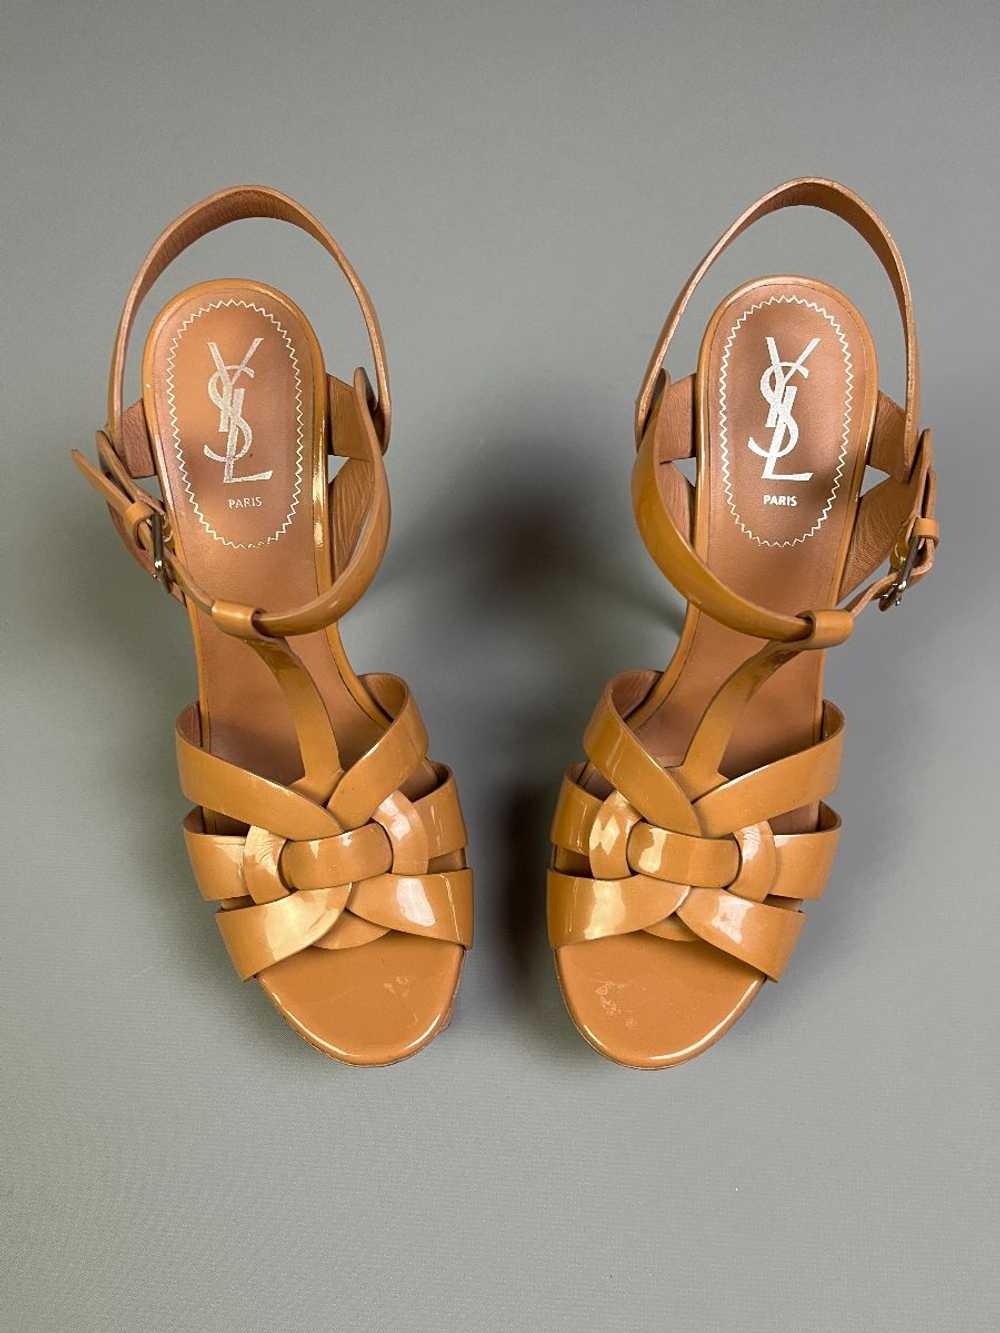 YSL NUDE PATENT LEATHER STRAPPY HEELS WRAP AROUND… - image 1